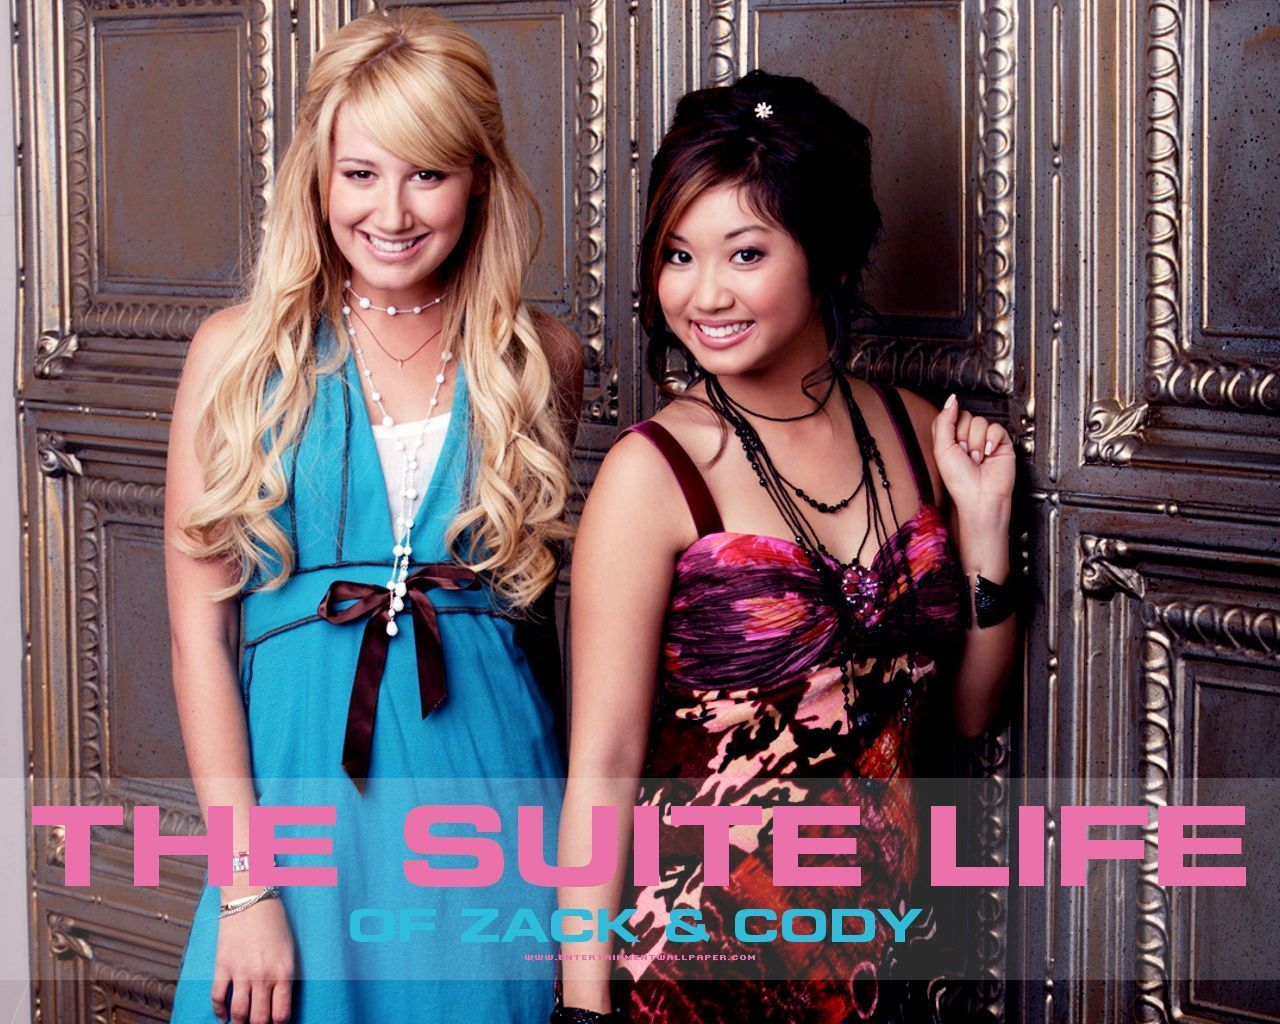 Brenda Song and Ashley Tisdale. Life has changed for them a little